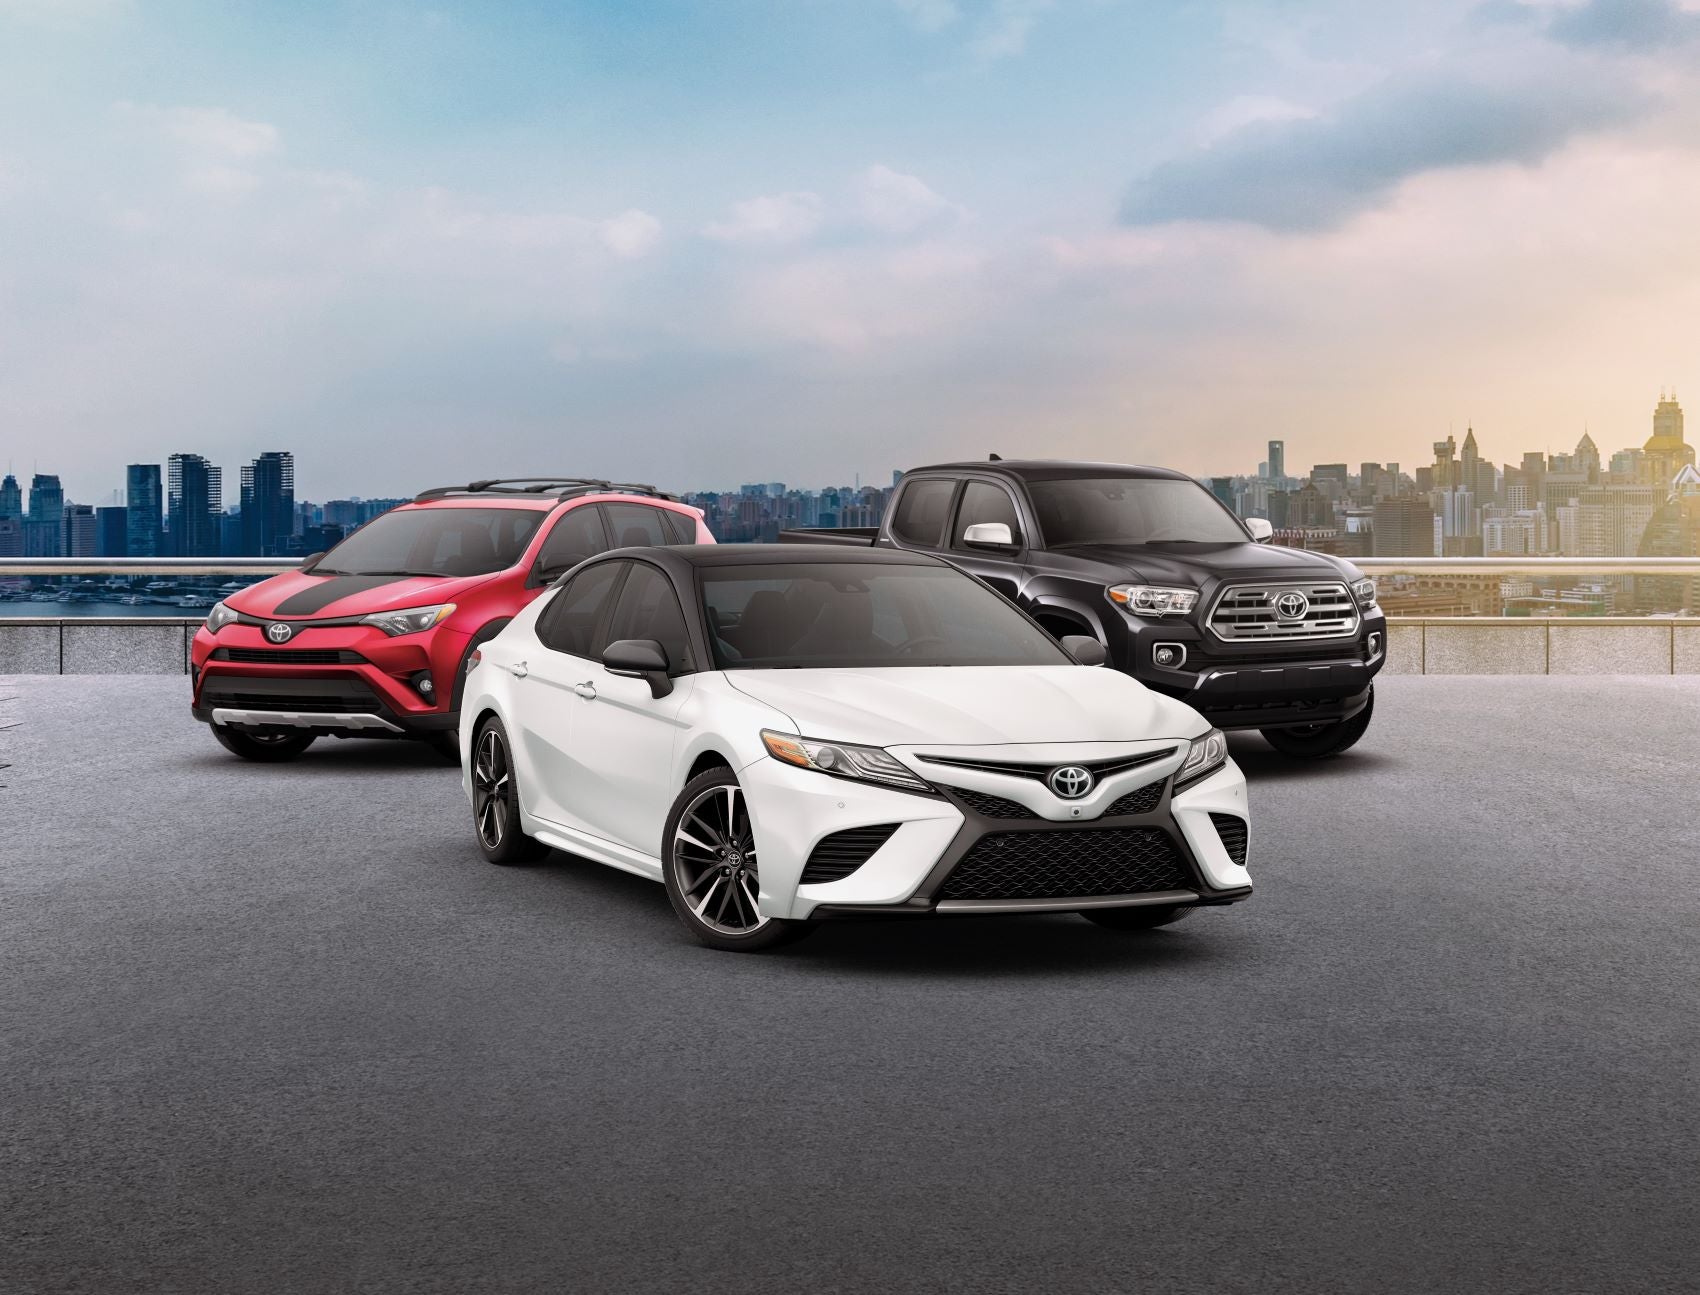 Selection of available Toyota models